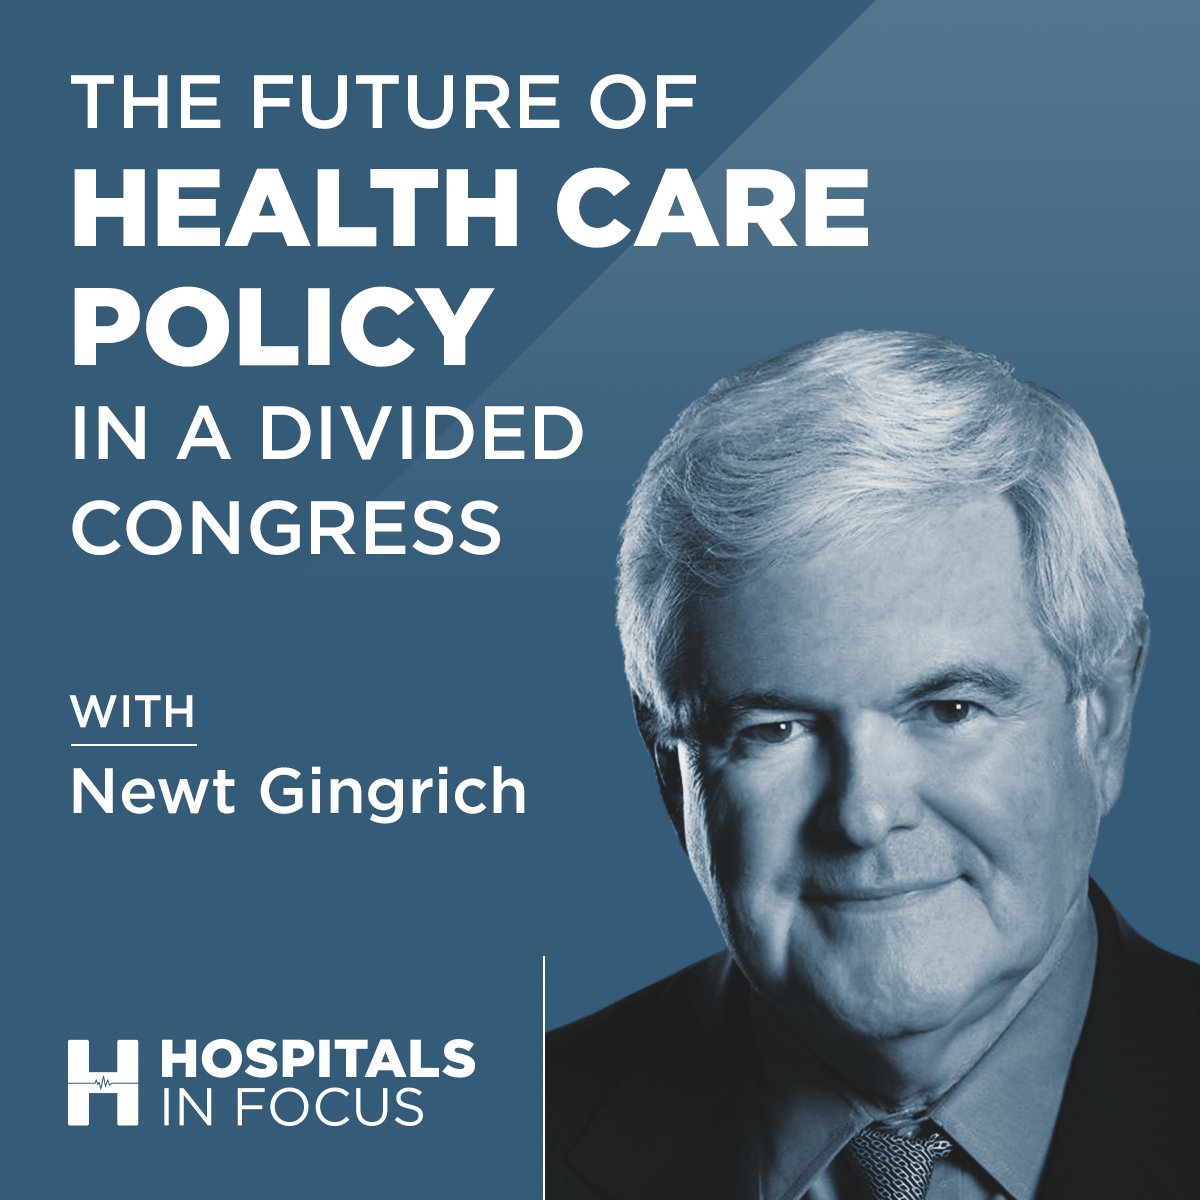 Still timely to listen to recent #HospitalsinFocus podcast episode with @newtgingrich.

We discuss: How hospitals can prioritize preventative care,  role hospitals play for future of health, how policymakers can elevate health care innovation.
bit.ly/3JxTPRb